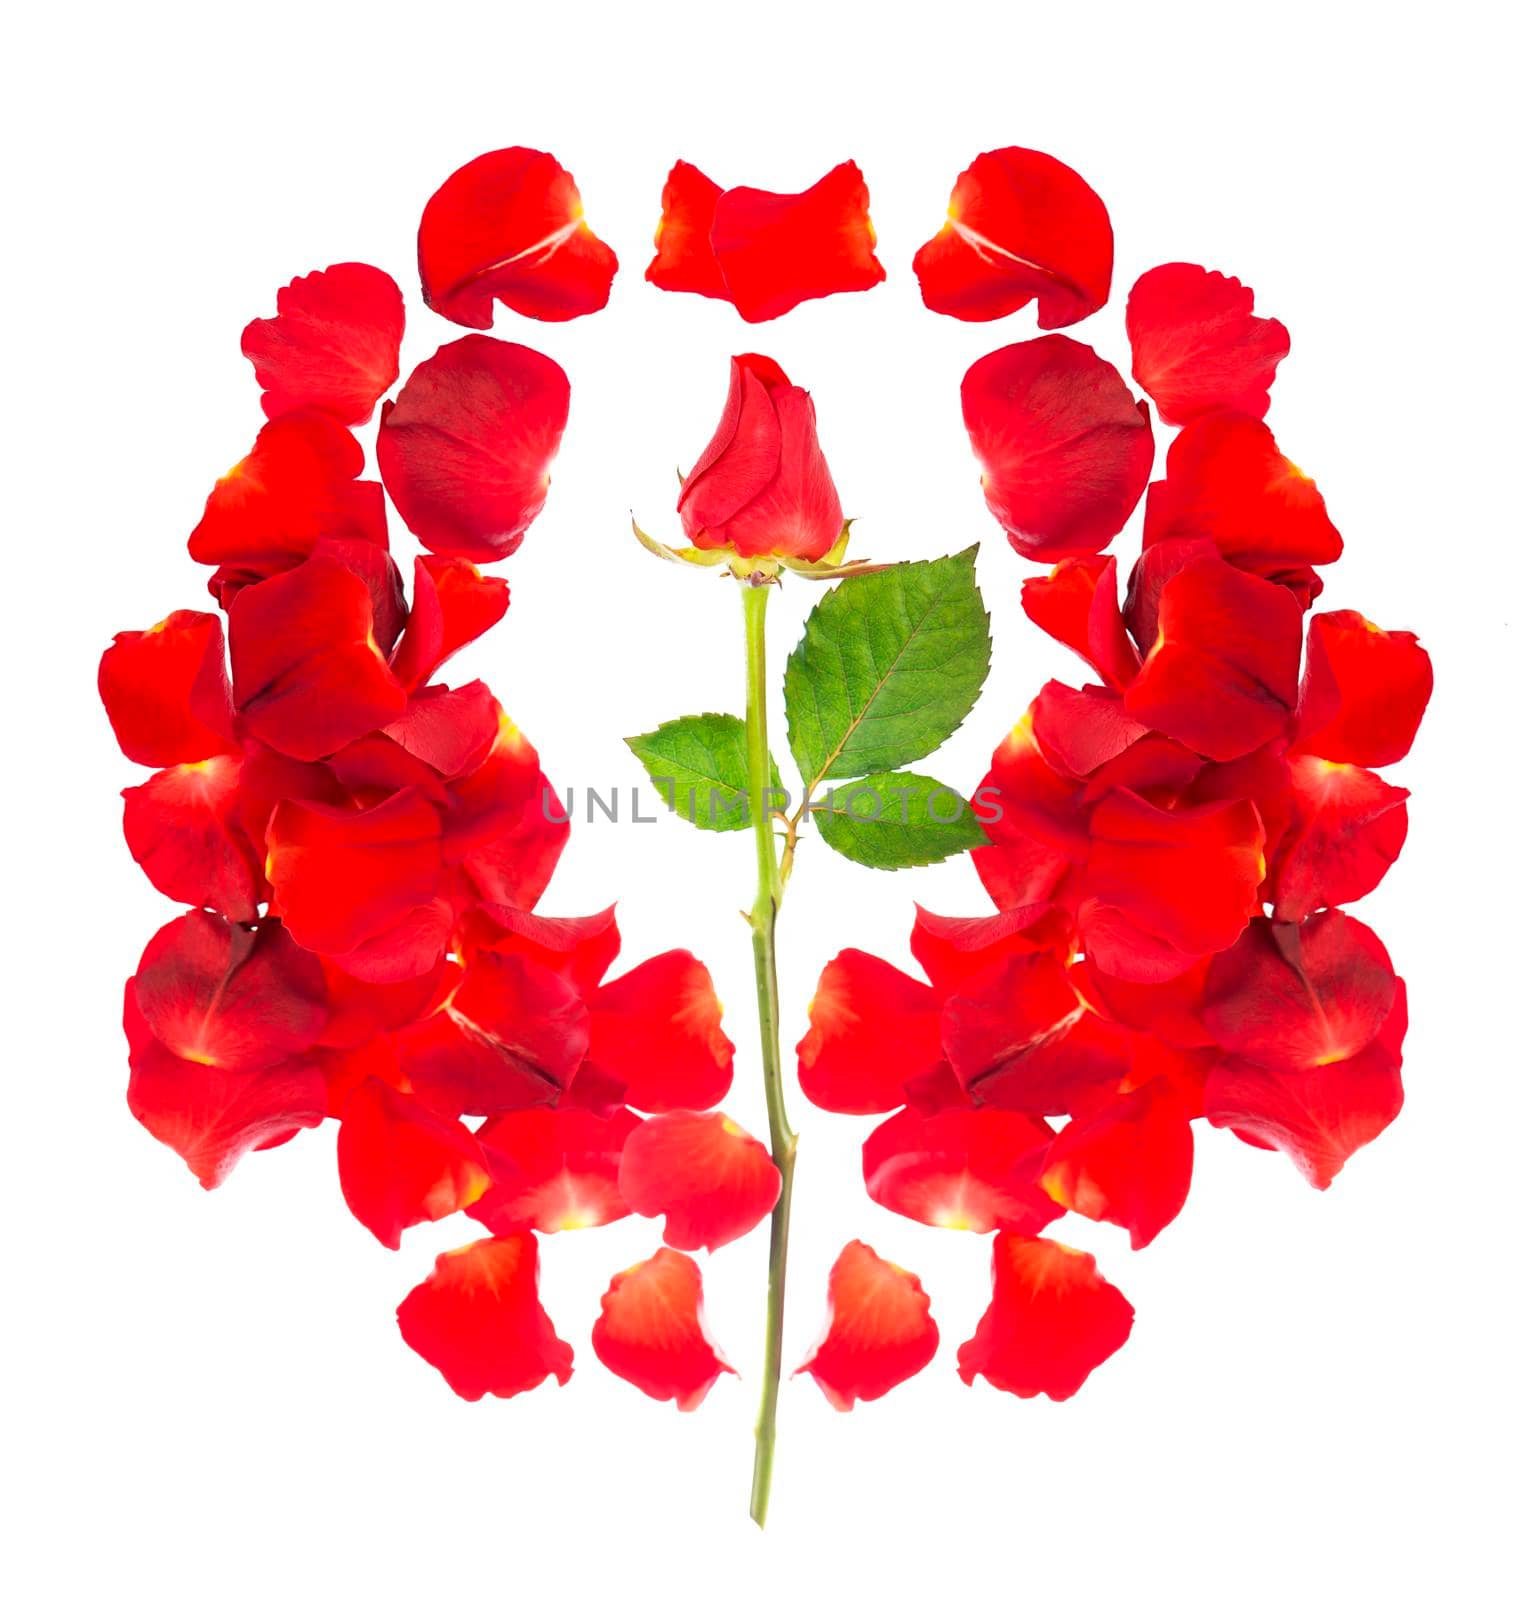 Red rose petals isolated over the white background.